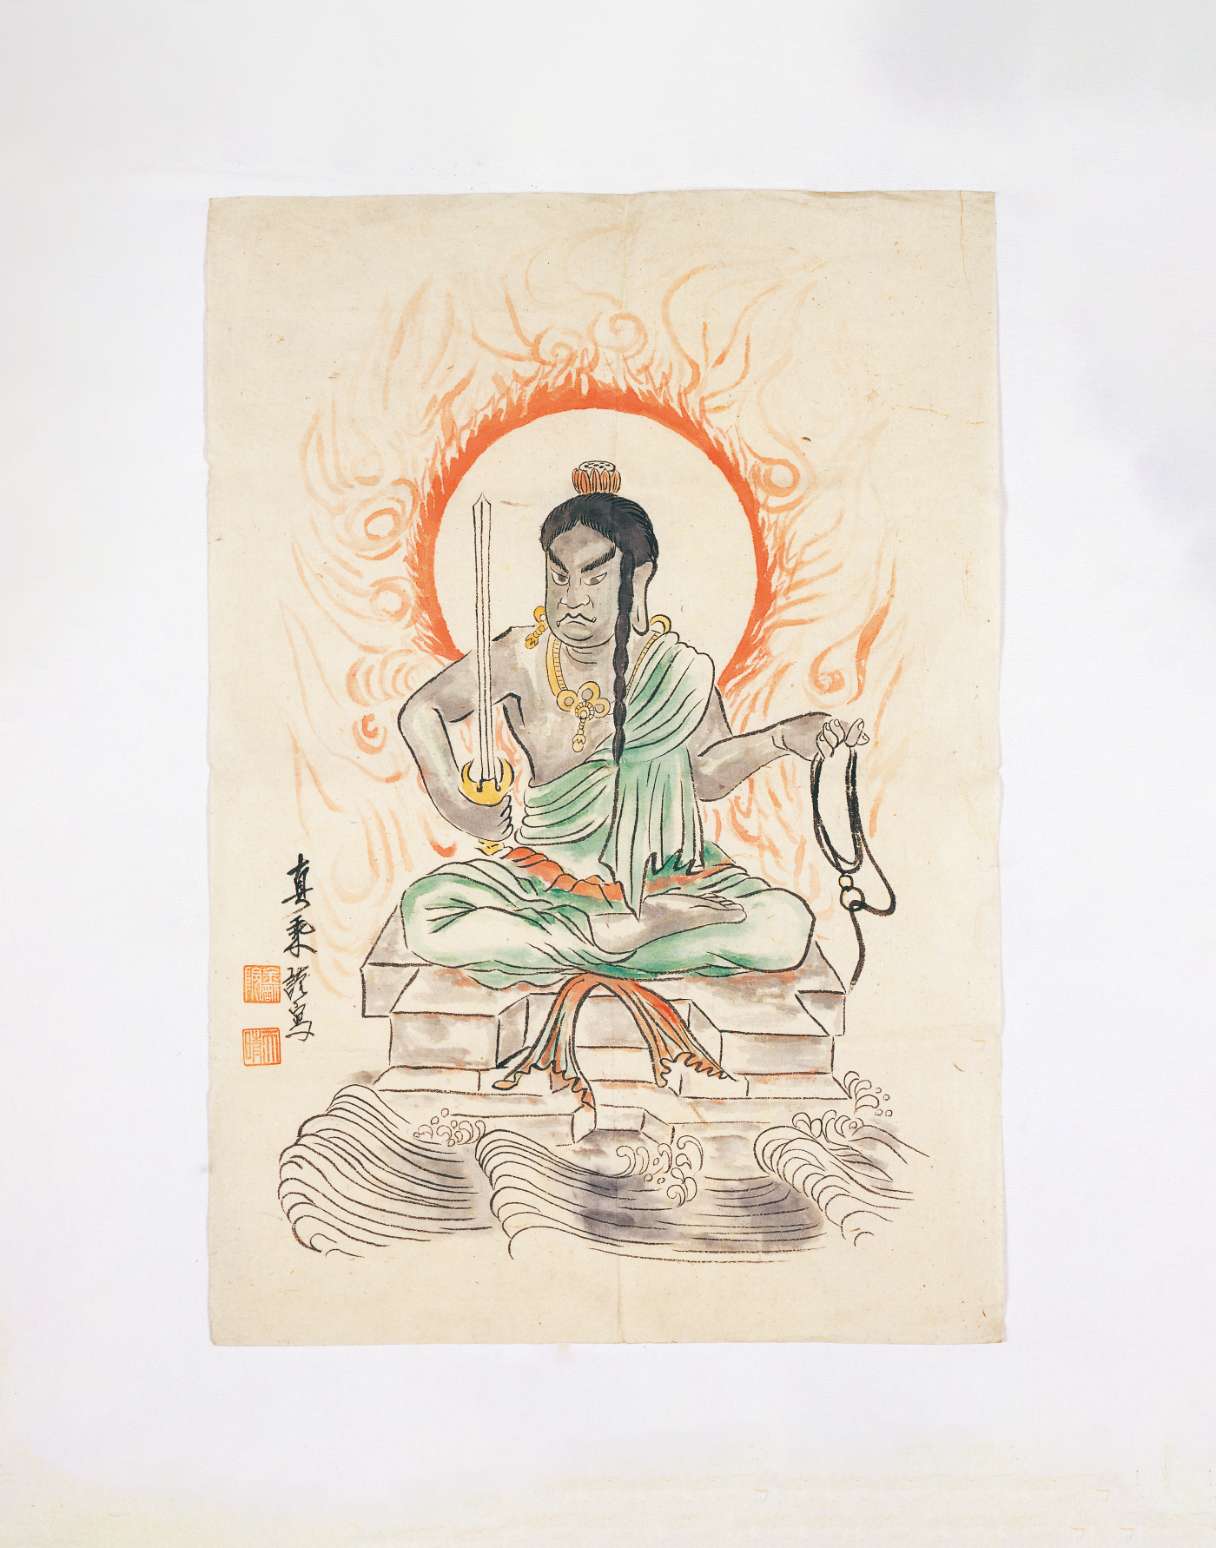 A colorful line painting of a scowling figure haloed in flames, wearing a robe and jewelry, sitting cross-legged, a sword in his right hand and a noose in the left, atop a rock amid churning waves.